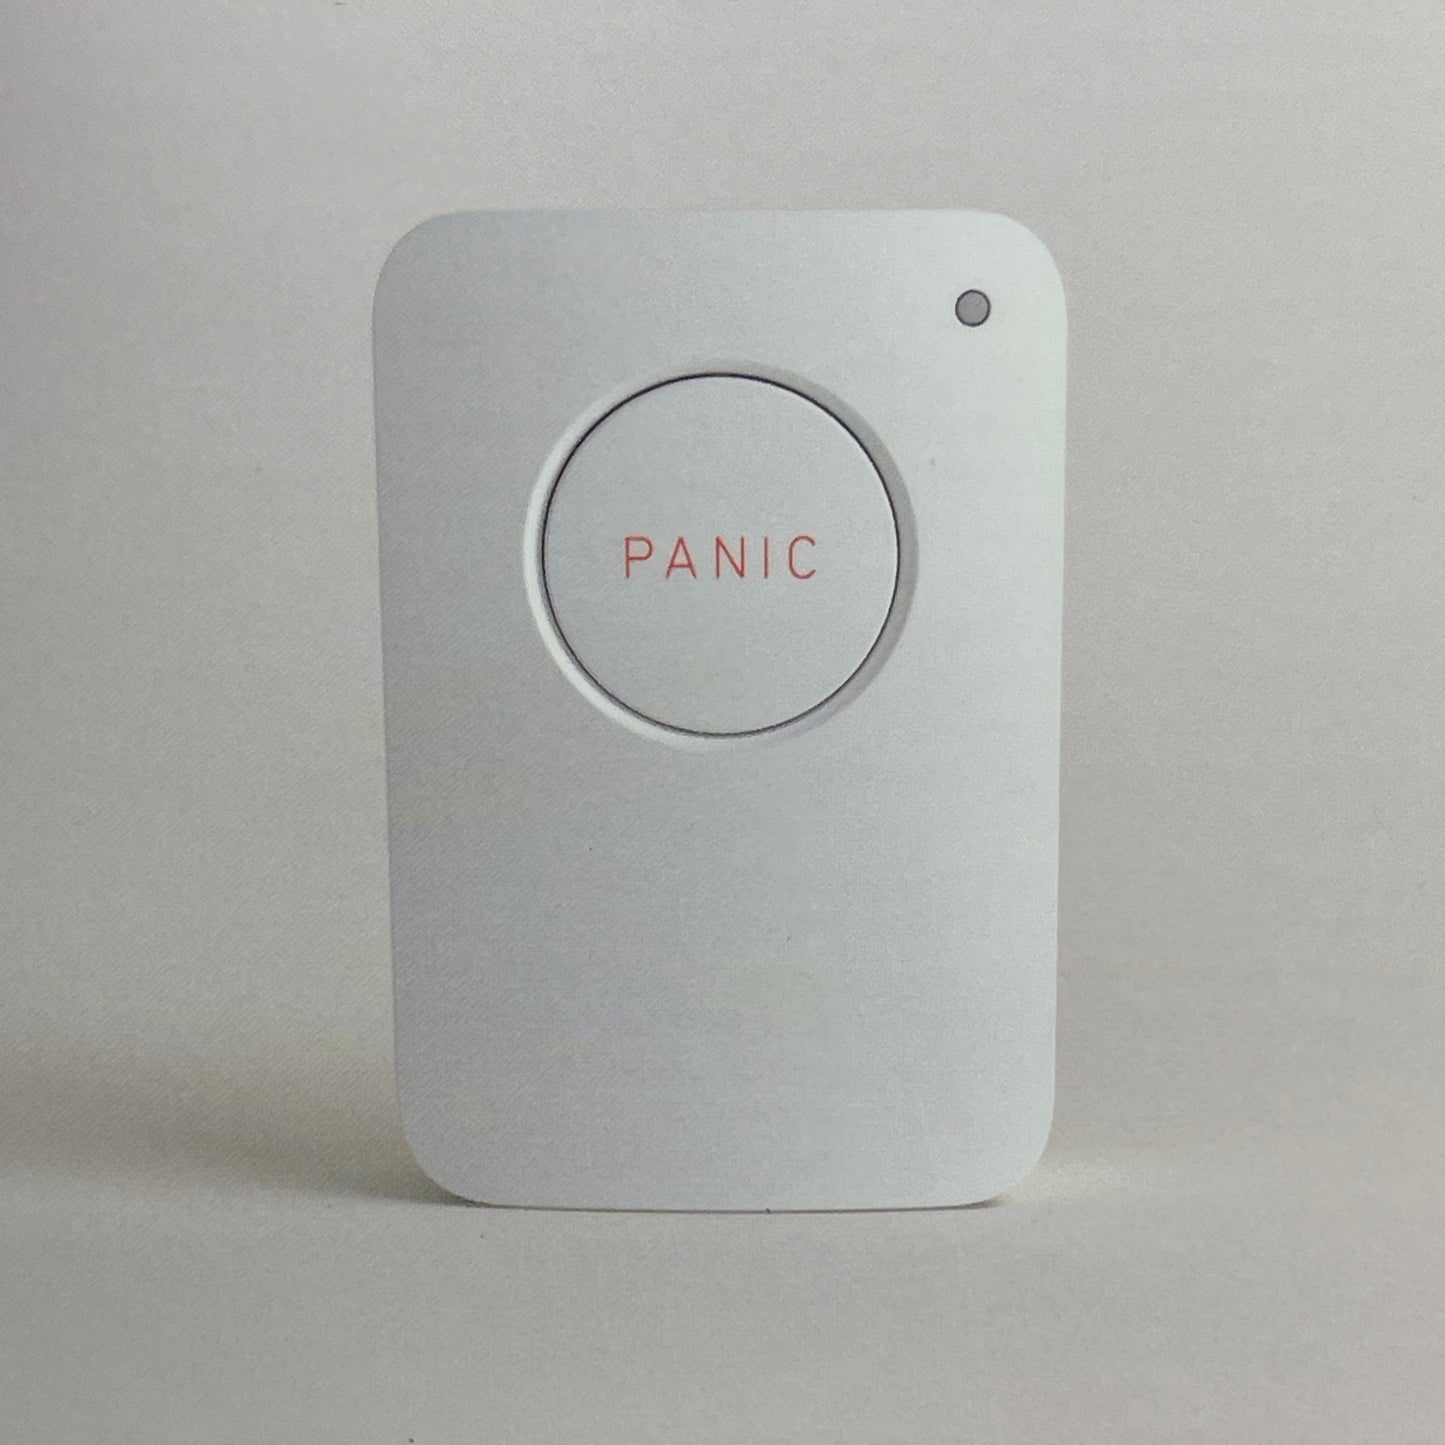 SIMPLISAFE Home Security Silent Panic Button White SS3 SSPB3-RTL (New)